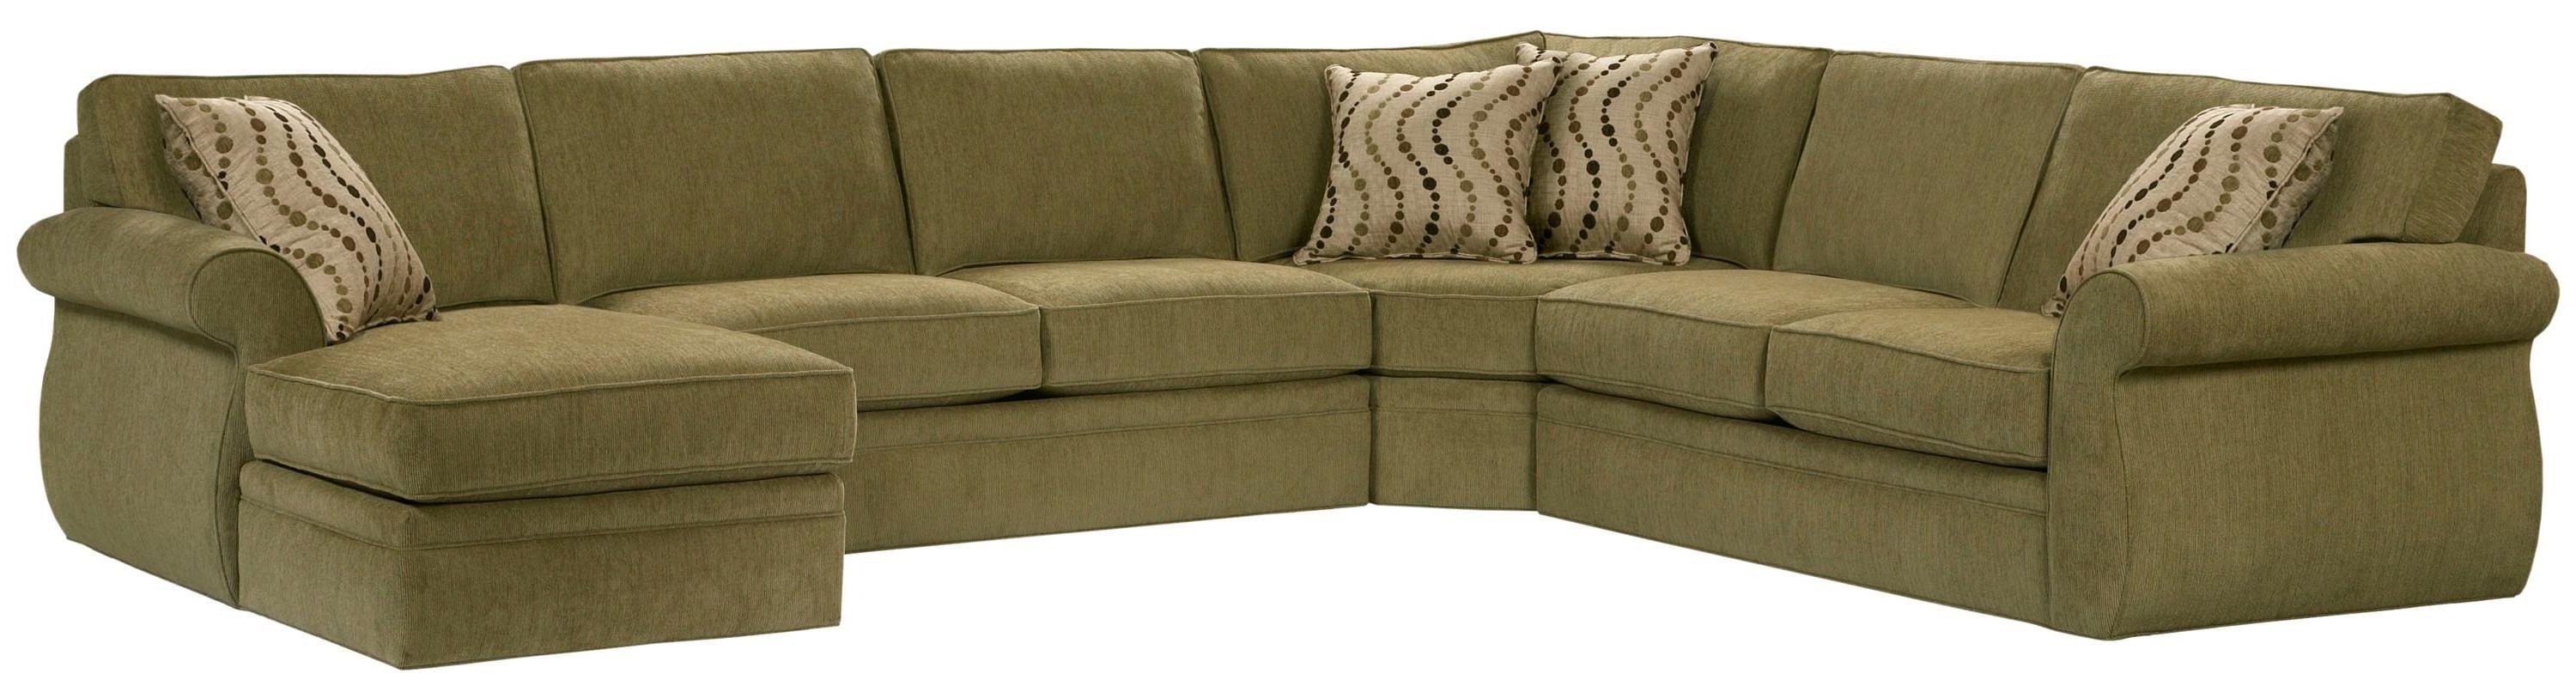 Featured Photo of 15 Photos Broyhill Sectional Sofas